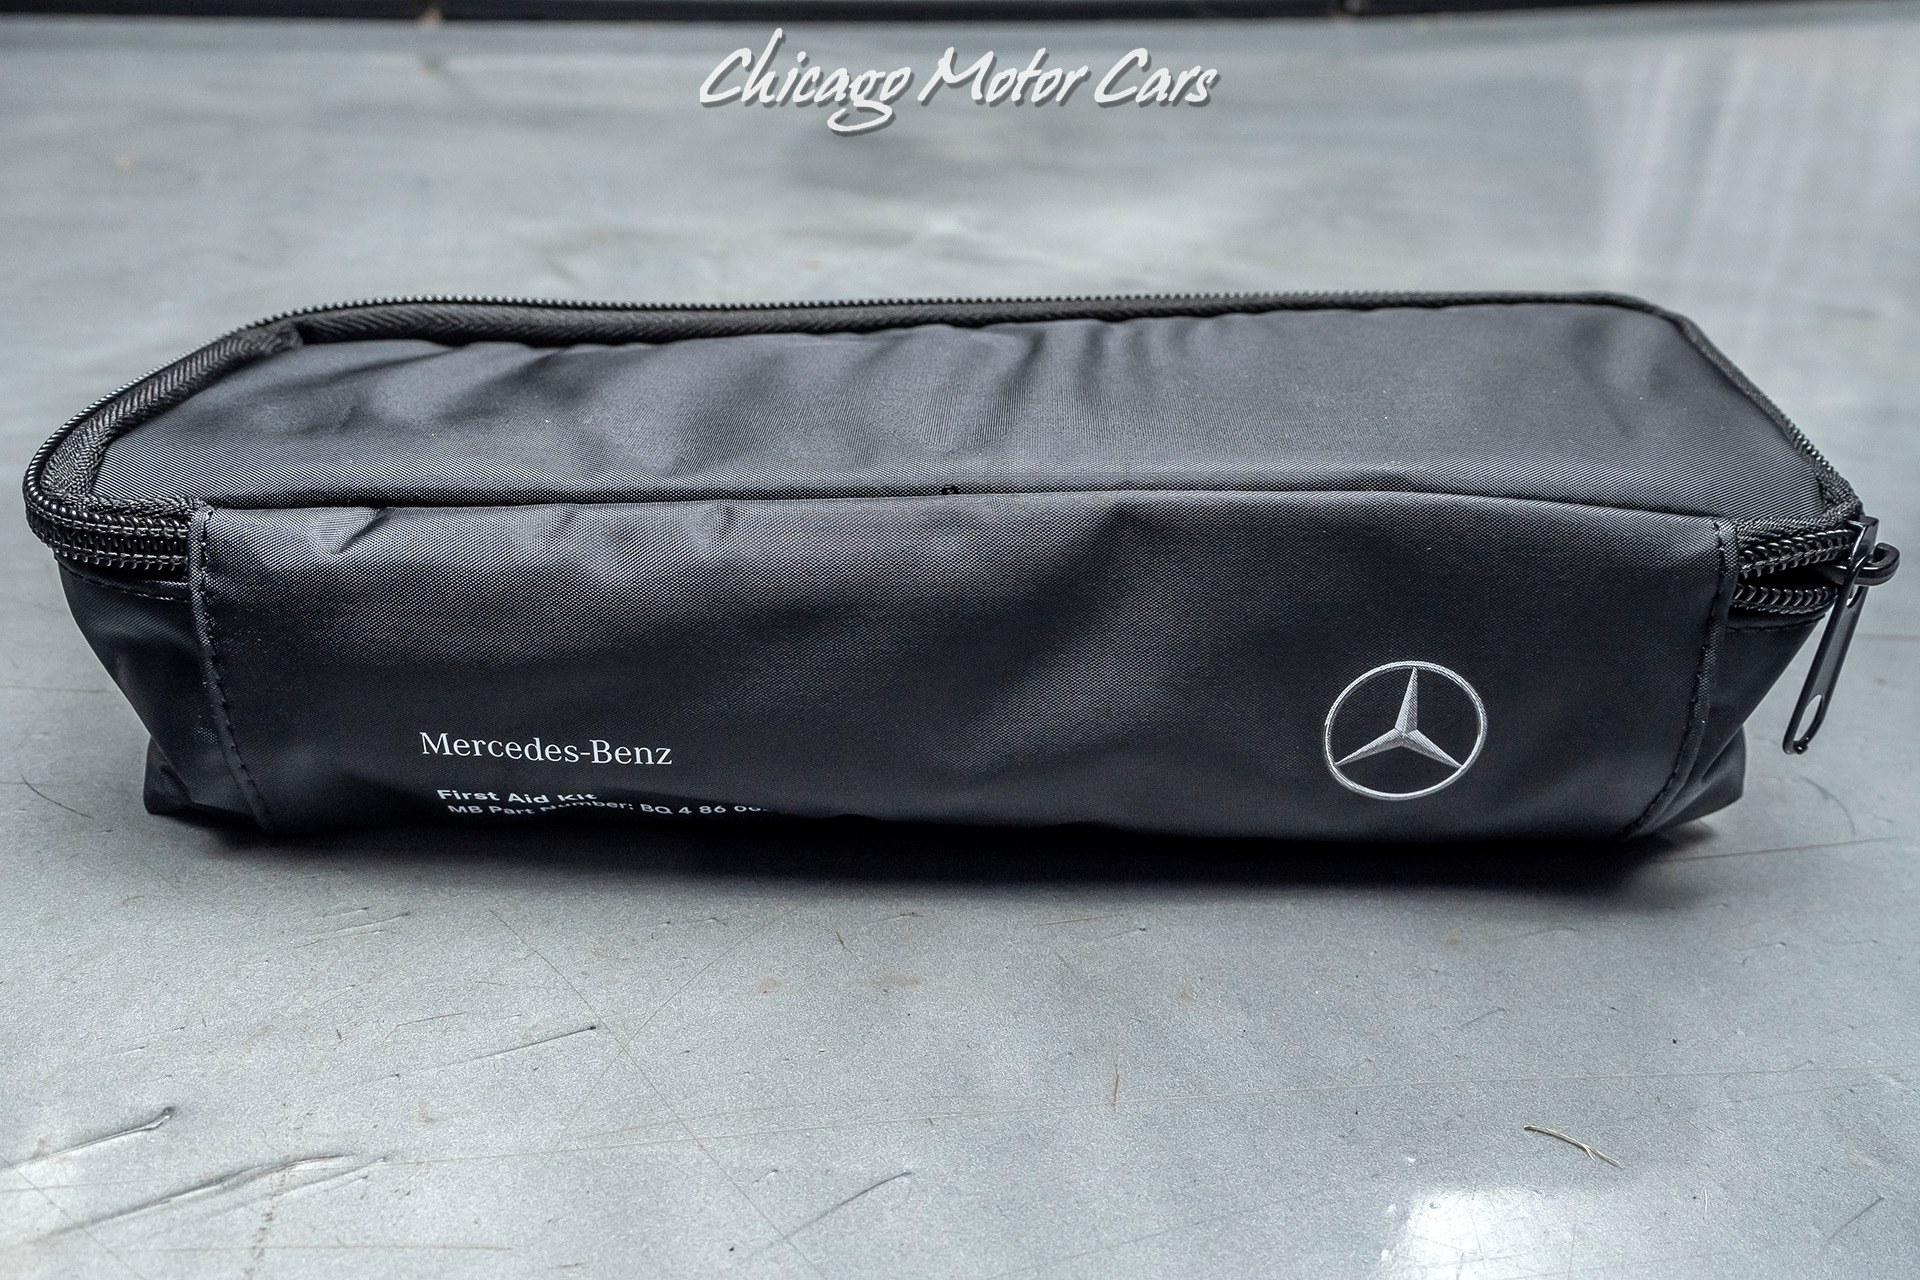 Mercedes-Benz - So much more than a travel bag: strong